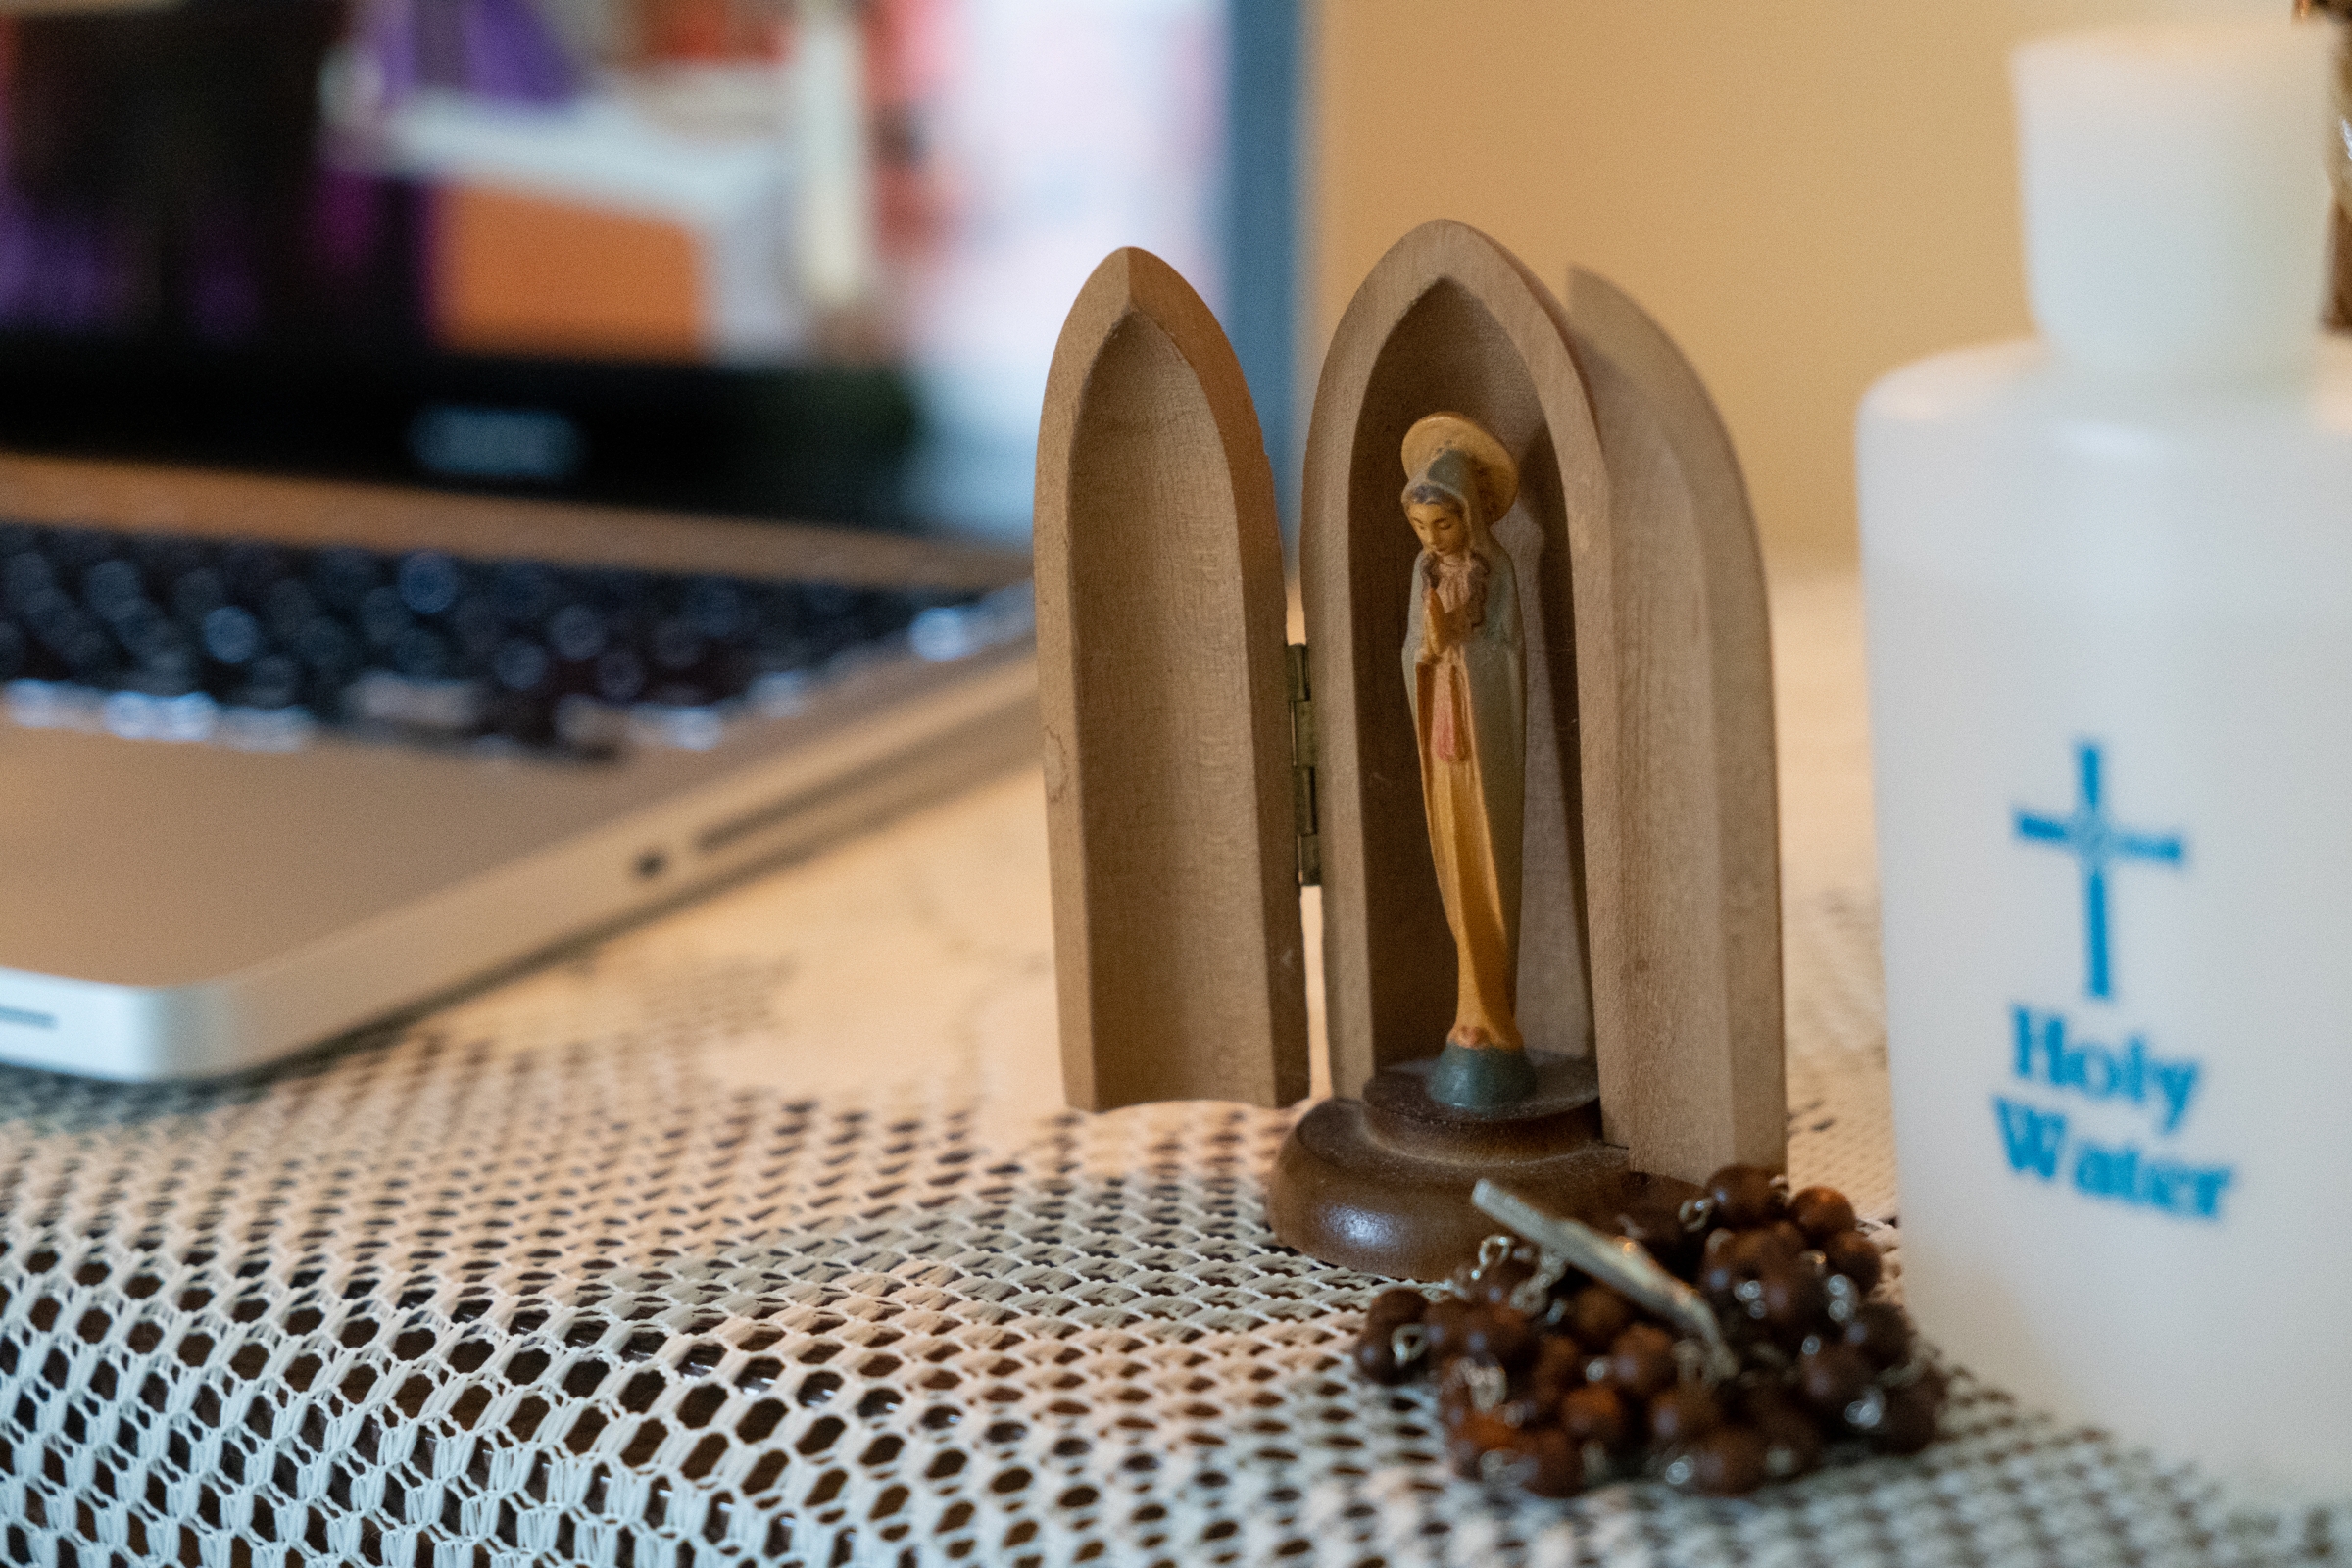 An image of the Blessed Mother adorns a prayer station set up in the home of parishioners of St. Charles Borromeo Catholic Church in Bloomington, Ind., who watched Mass livestreamed from their church March 28, 2020. (CNS photo/Katie Rutter)